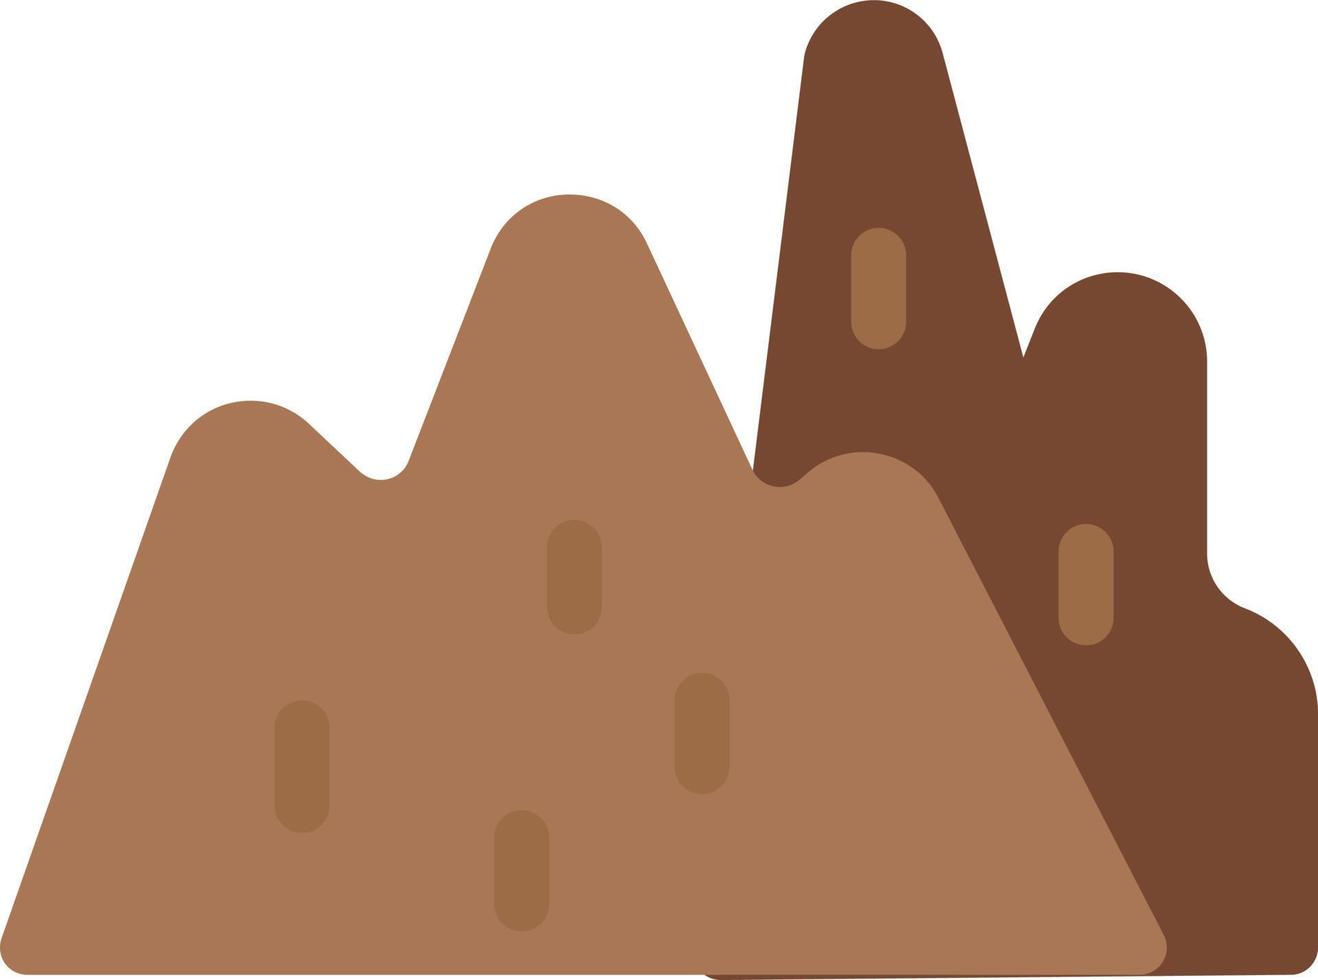 cappadocia vector illustration on a background.Premium quality symbols.vector icons for concept and graphic design.